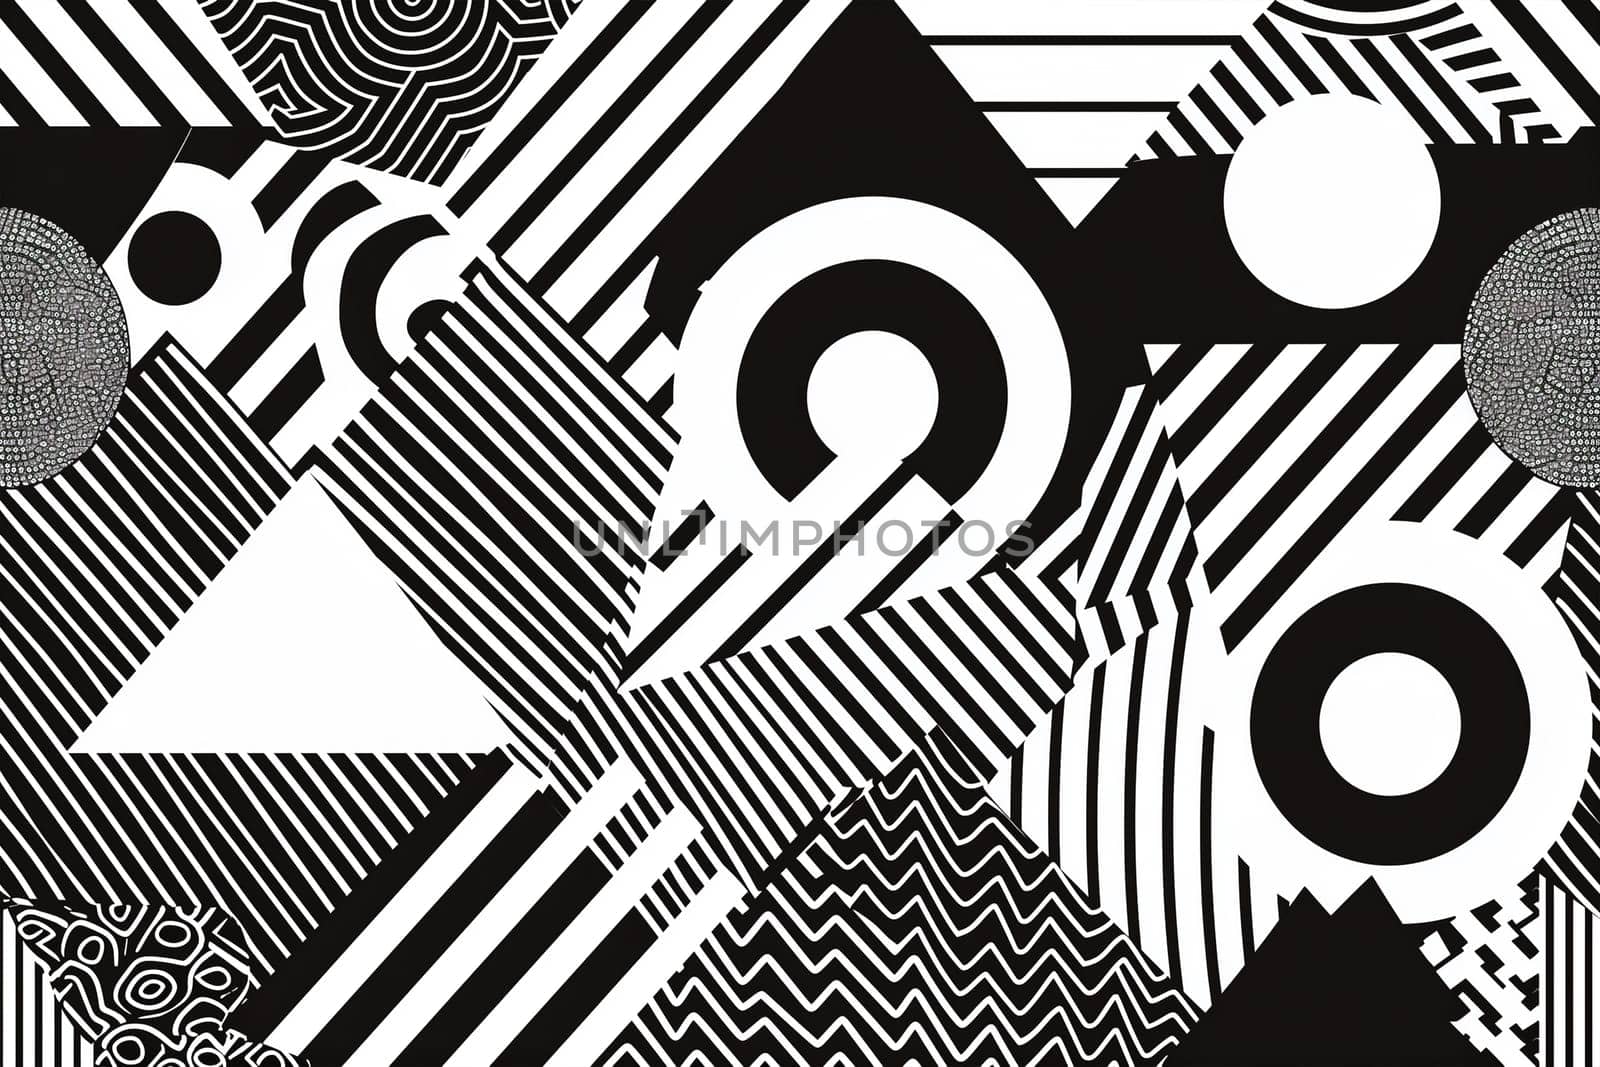 Intricate black and white design featuring interconnected circles forming an abstract pattern.